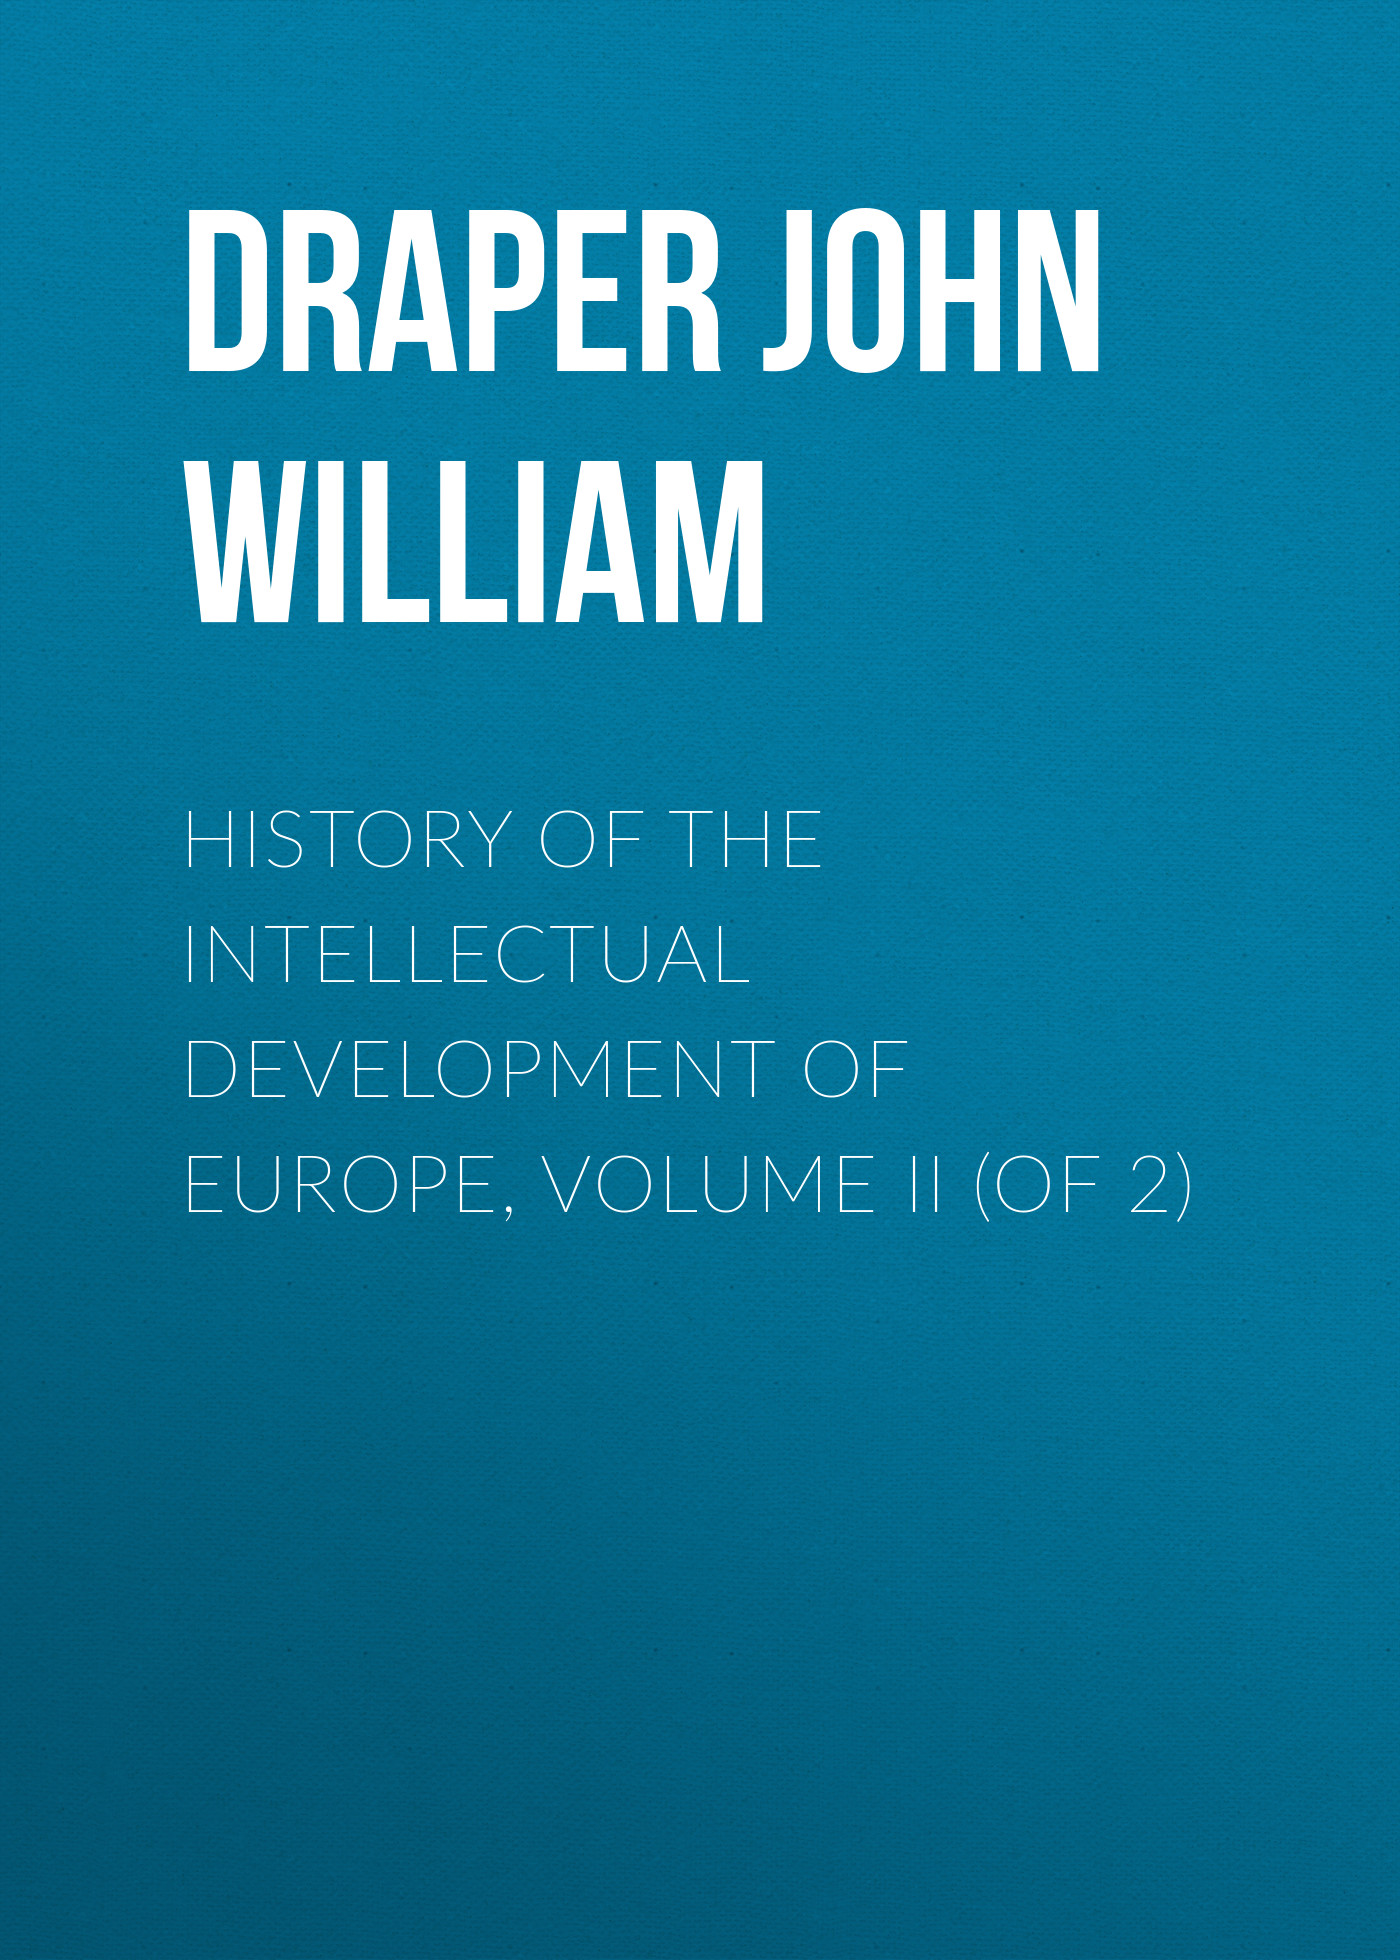 History of the Intellectual Development of Europe, Volume II (of 2)